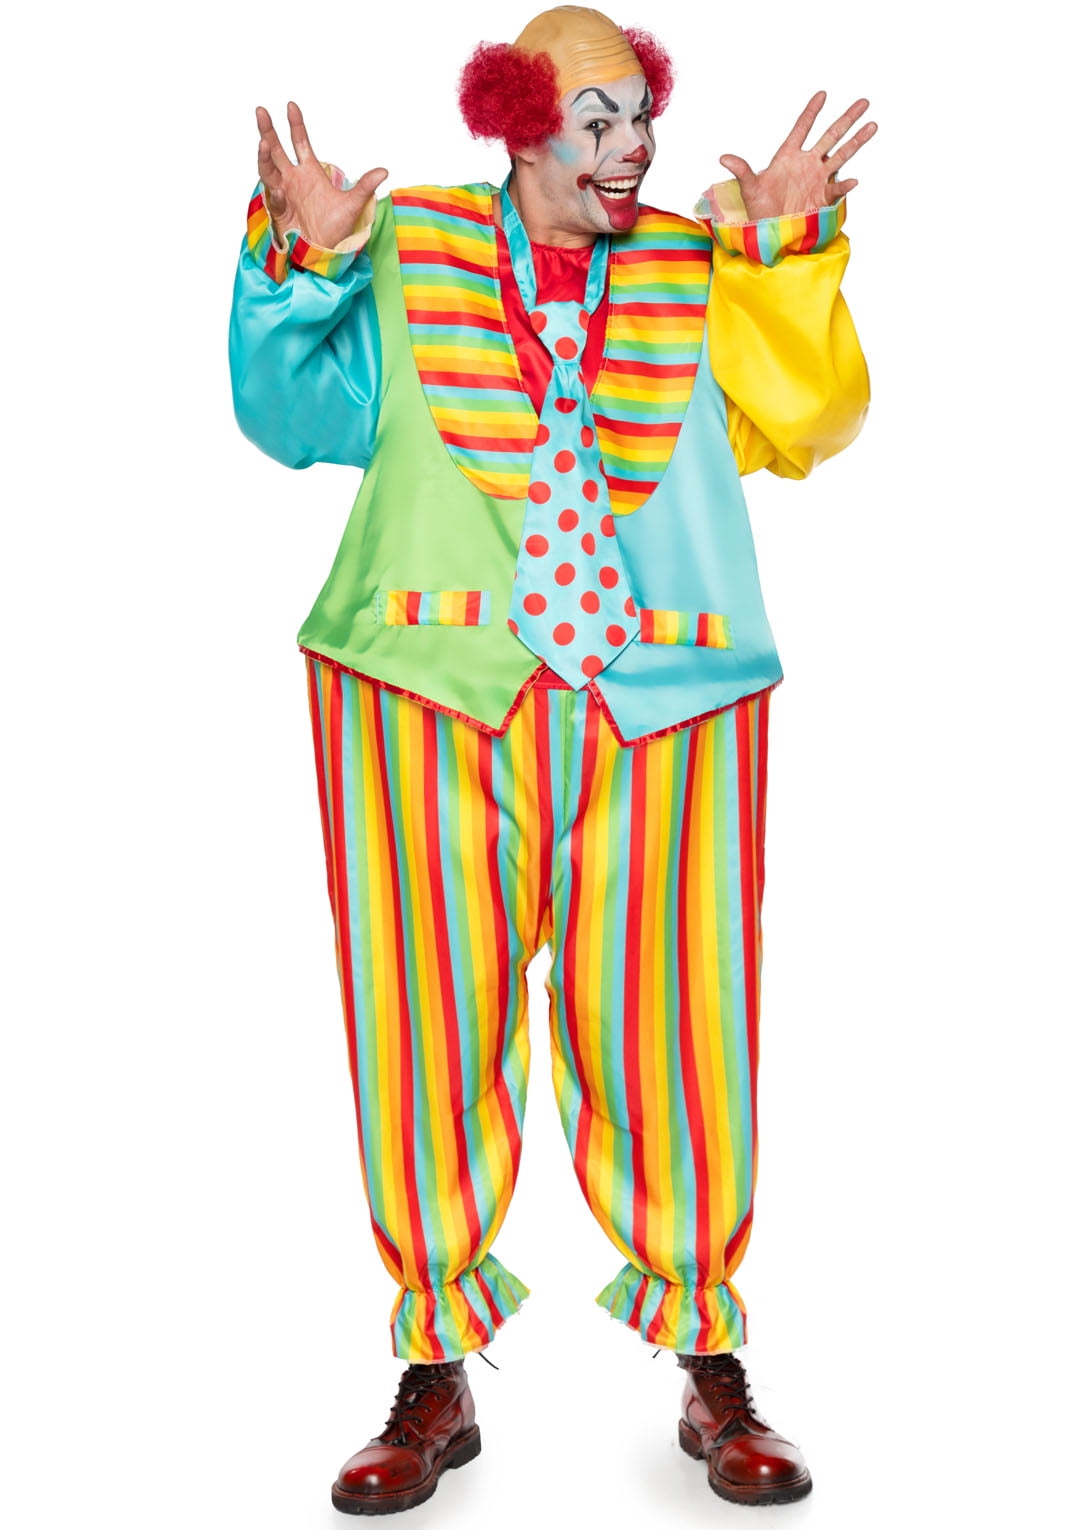 Details about   Adult Circus Funny Clown Sets Men's Clown Character Costume for Christmas Party